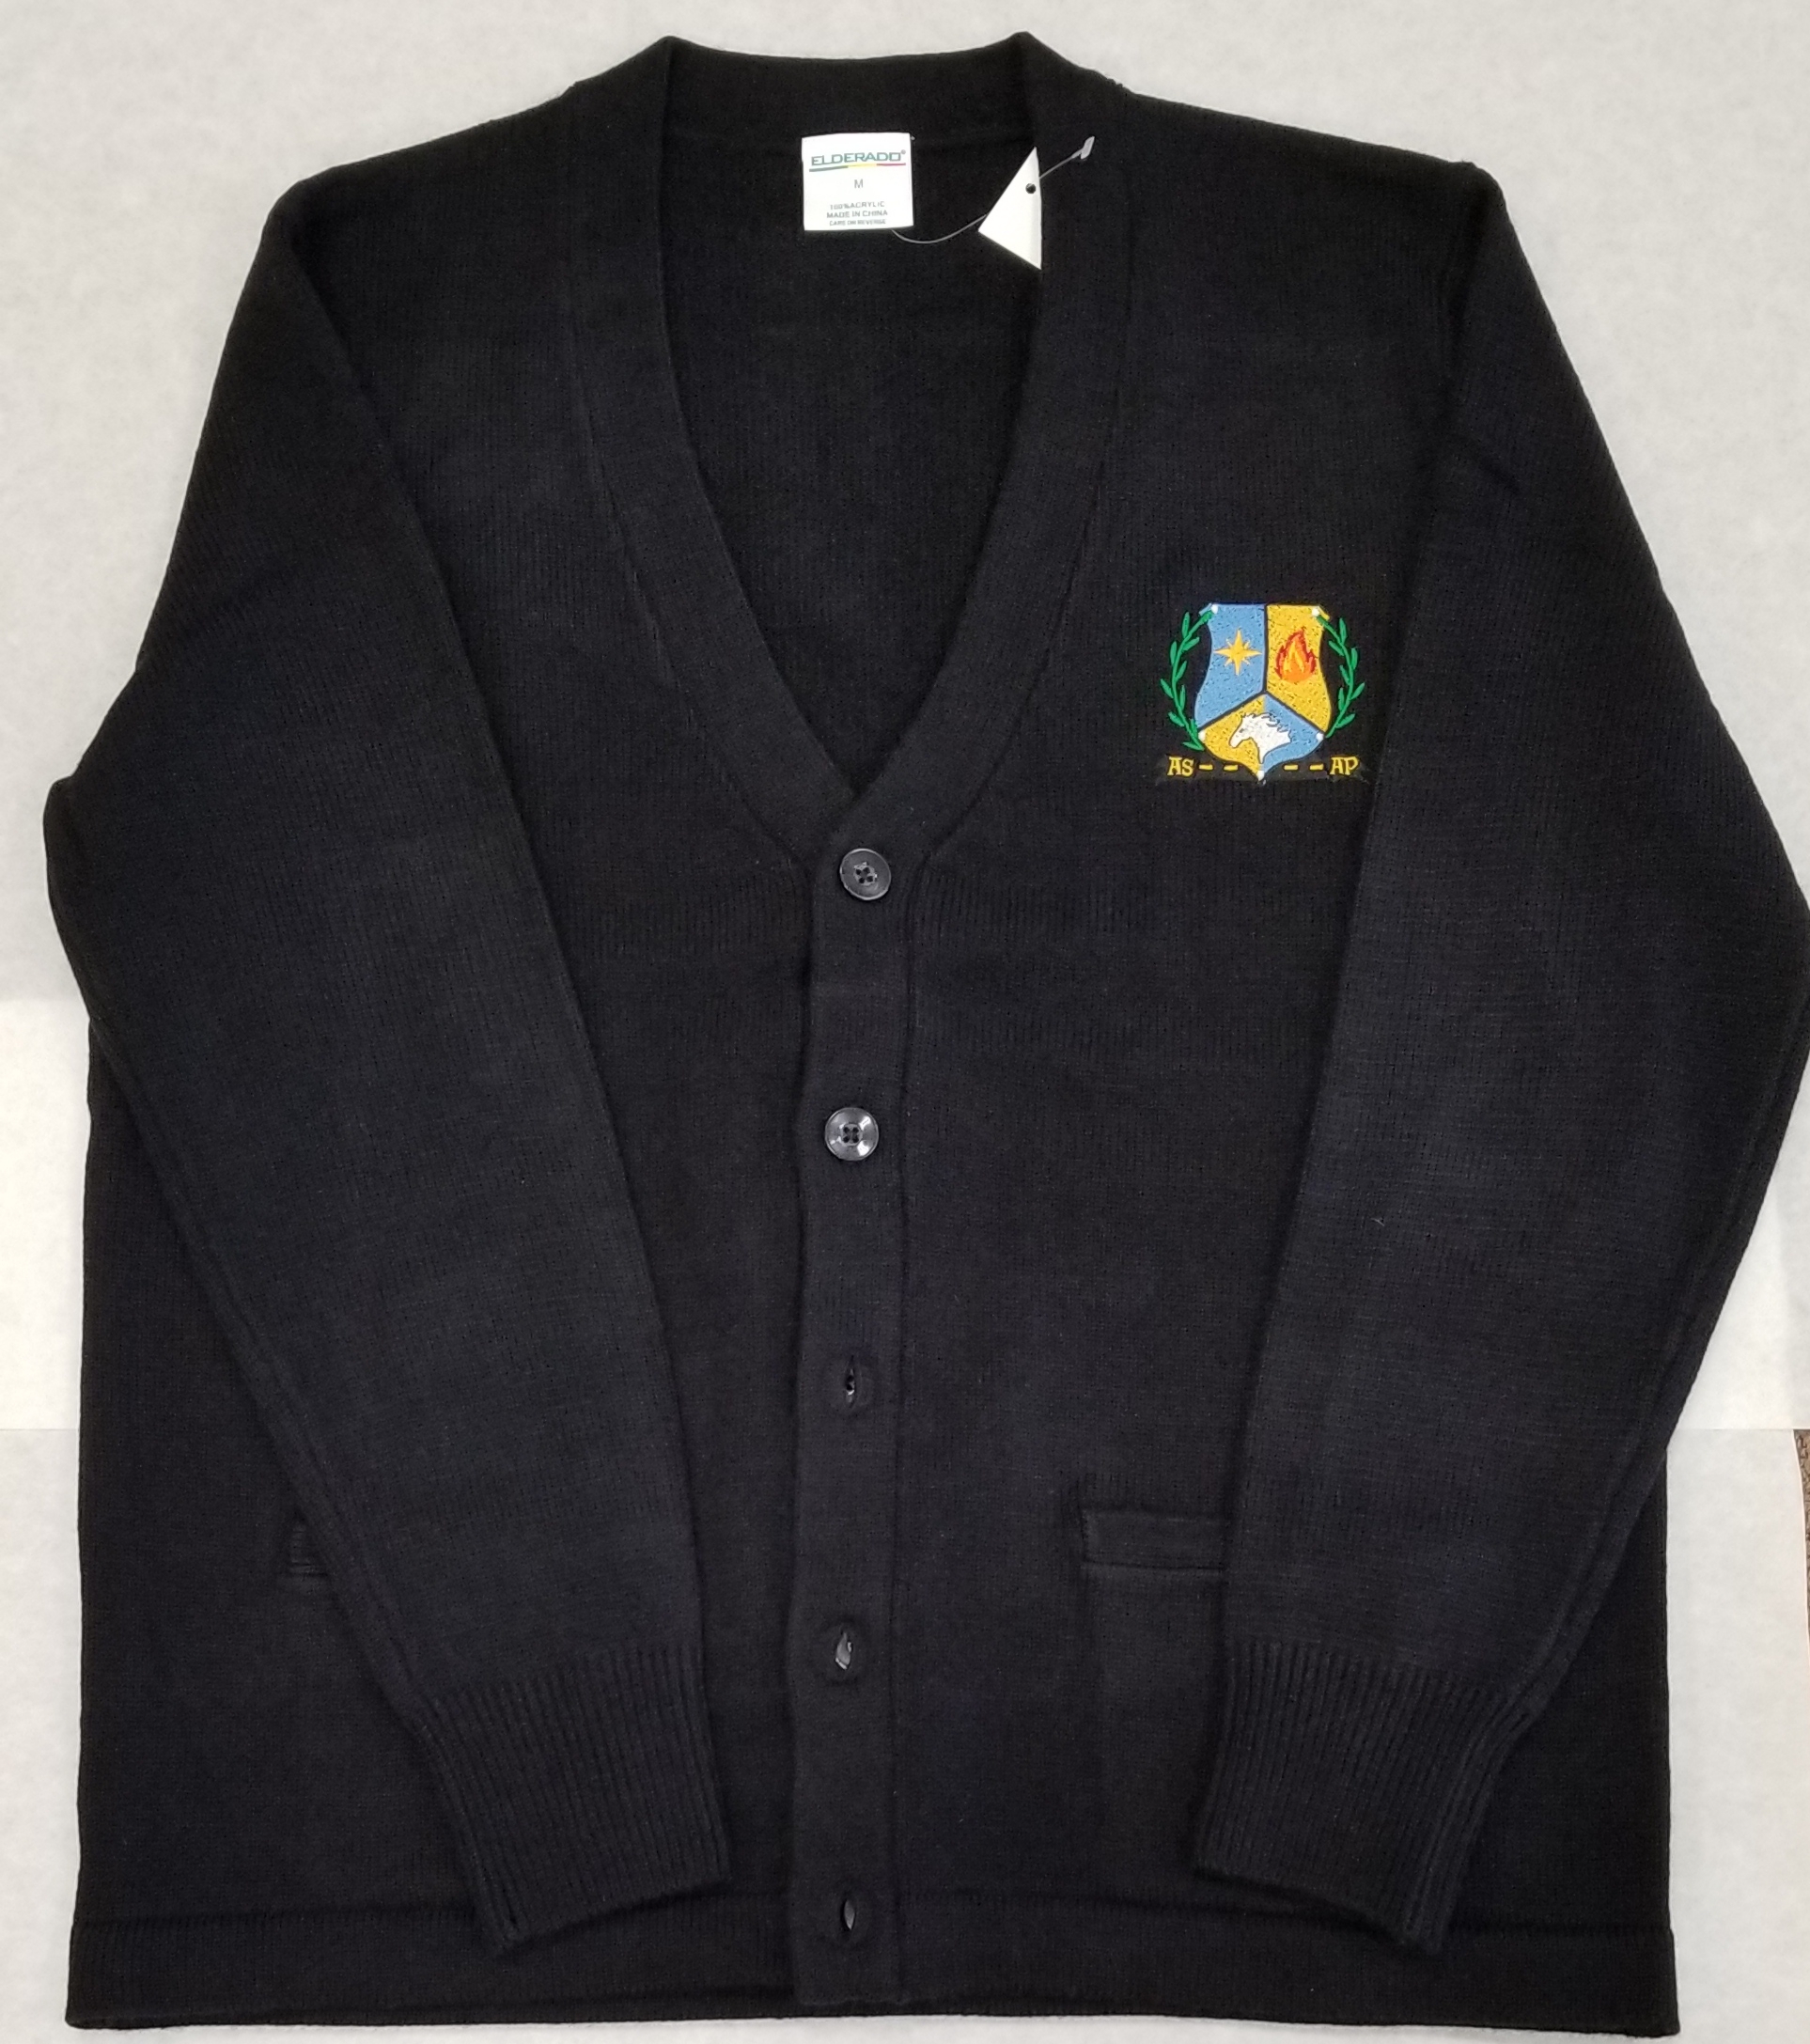 BC-Adult Navy cardigan sweater with logo